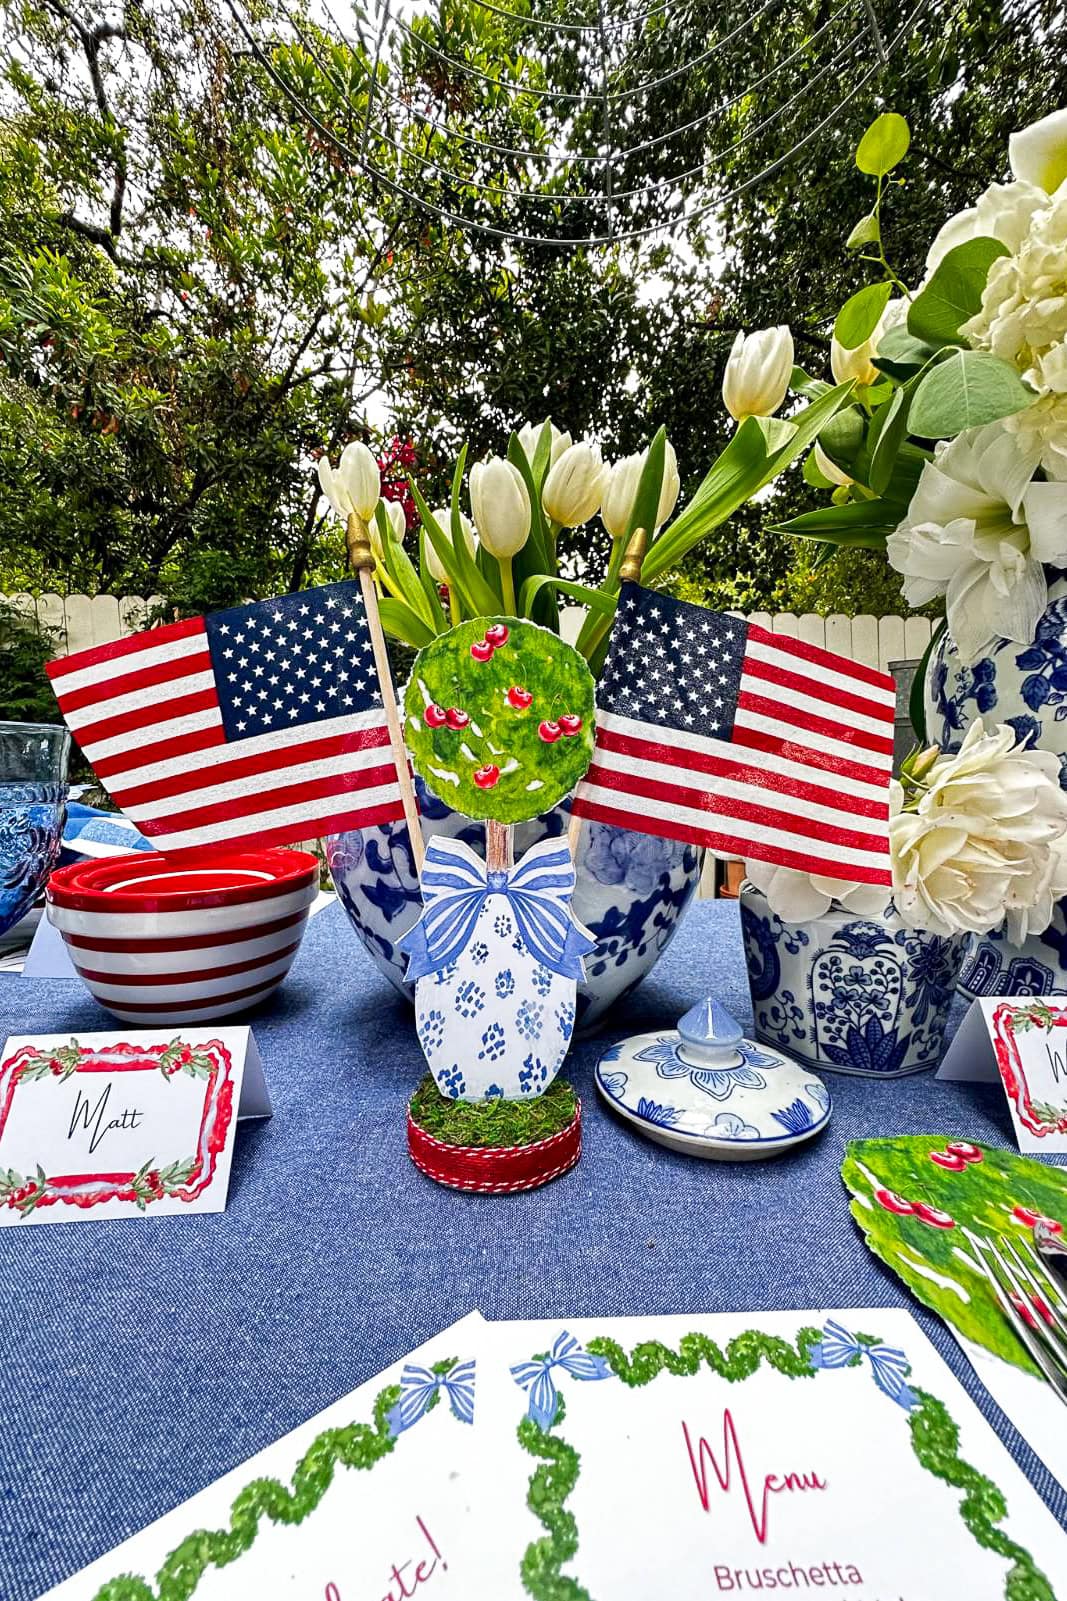 Decorating with American Flags to create a patriotic red, white and blue centerpiece with flowers